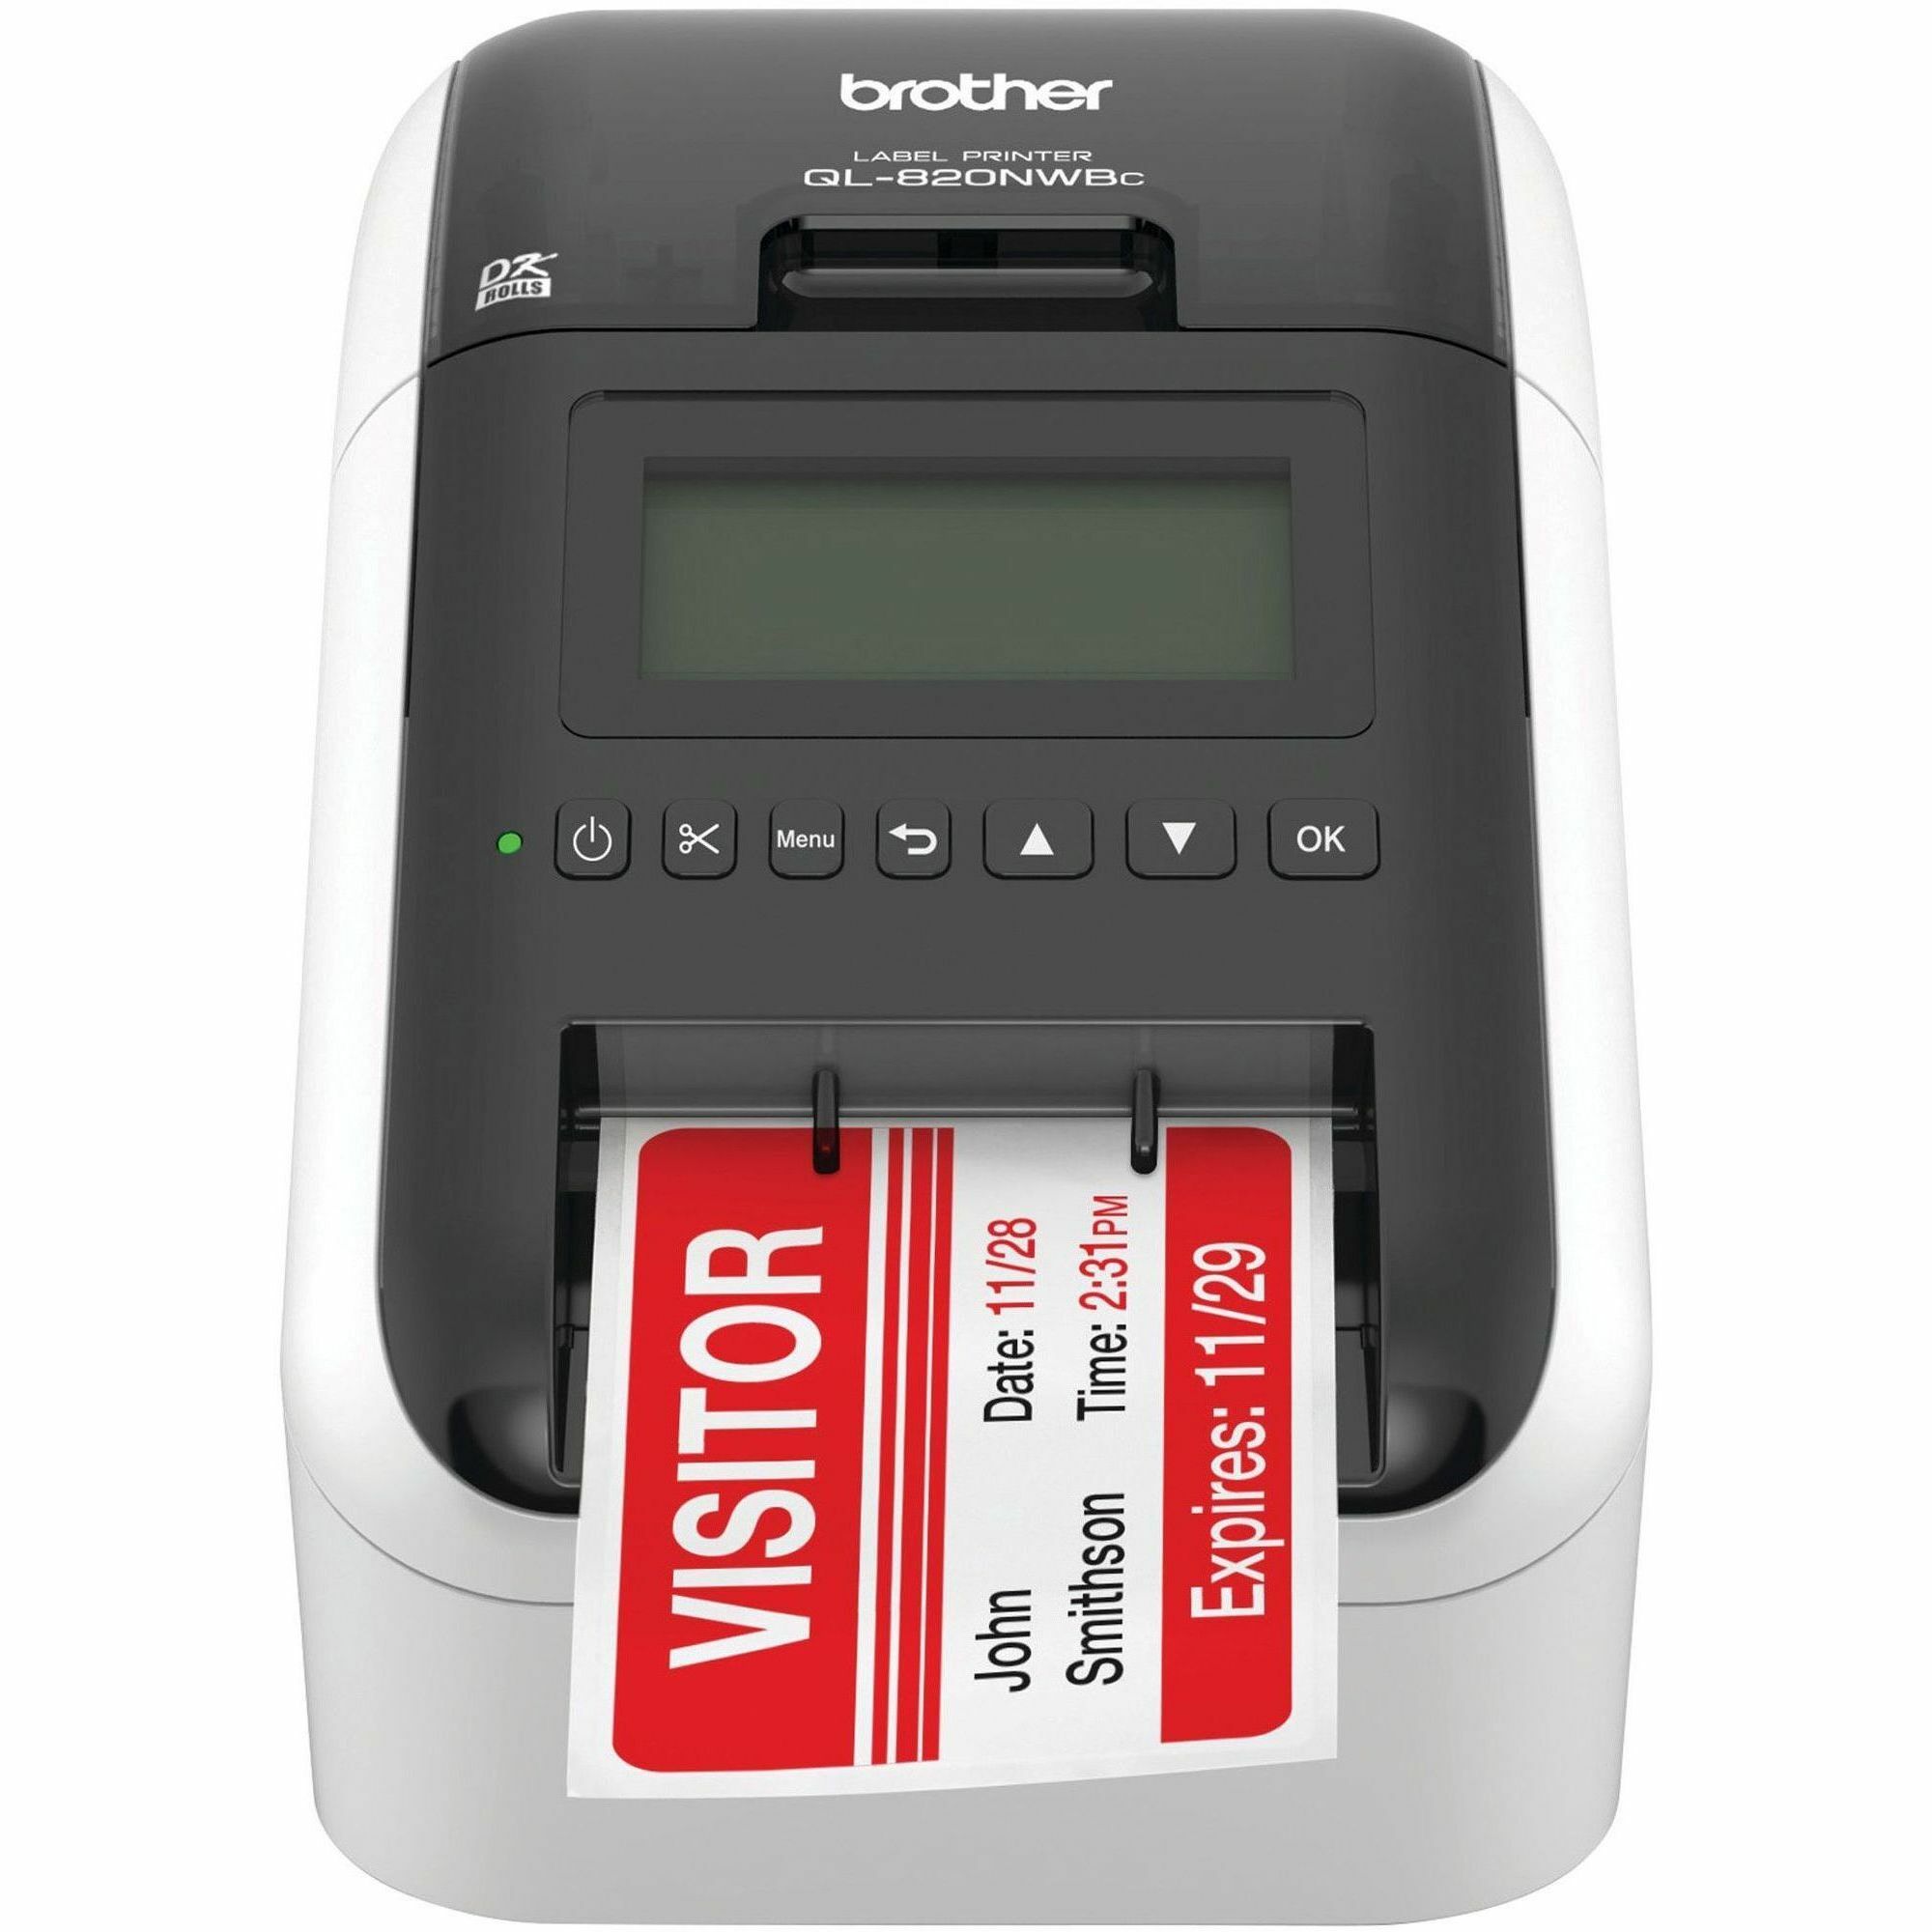 Brother QL-820NWBC Ultra Flexible Label Printer with Multiple Connectivity options